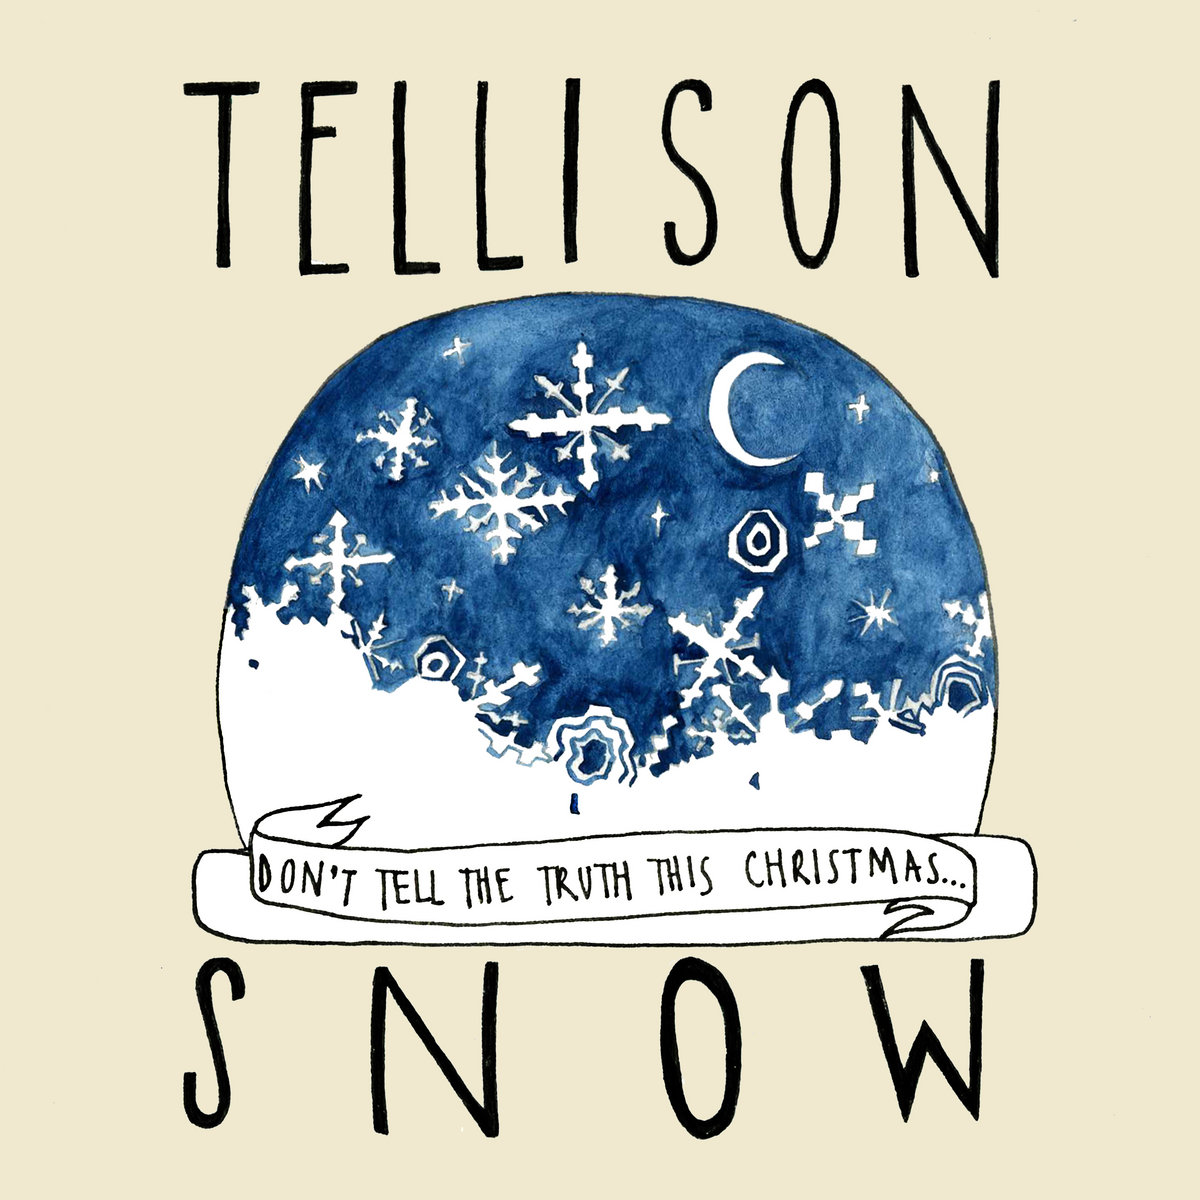 Cover for Tellison Christmas single Snow which features the words Tellison and Snow and a snow globe.